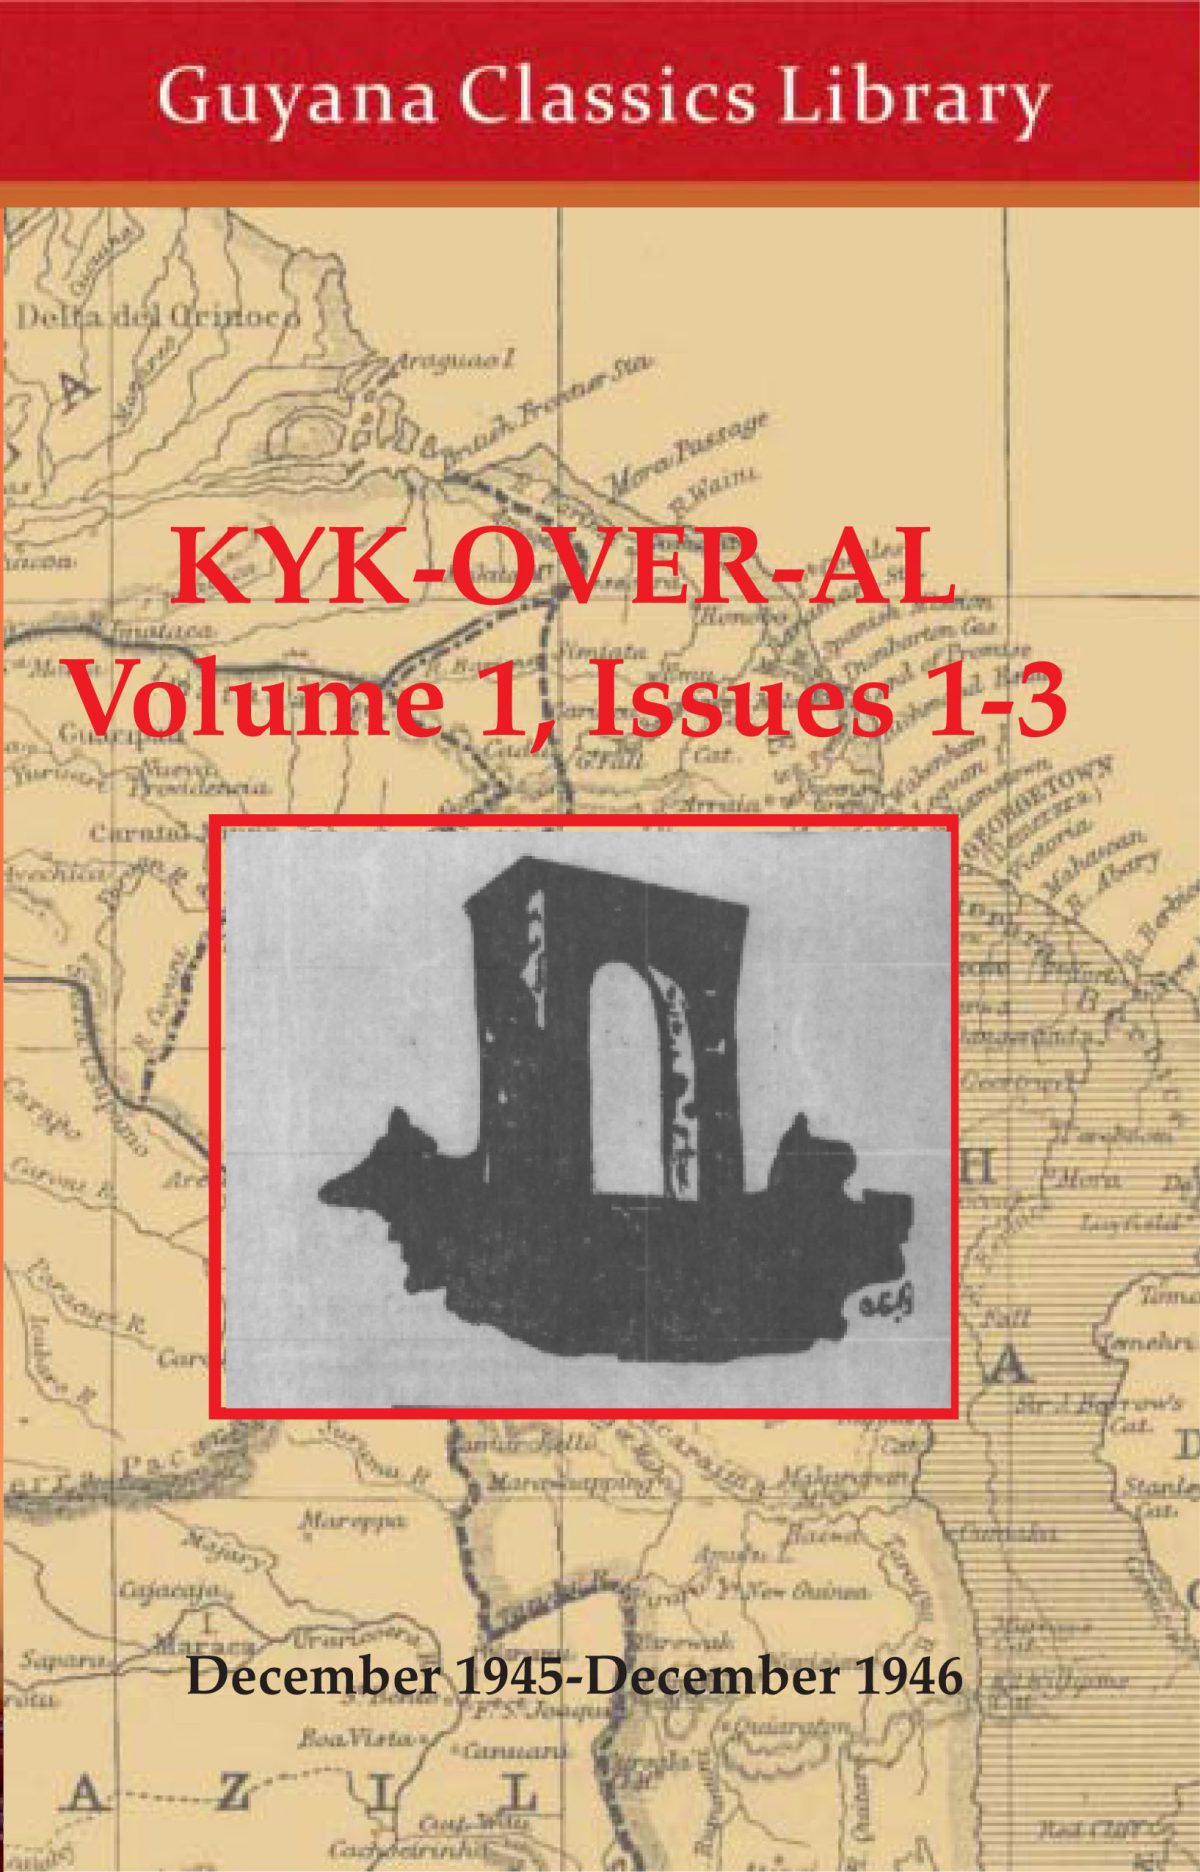 The cover of the Guyana Classics Library’s collection of the first three volumes of Kyk-Over-Al
